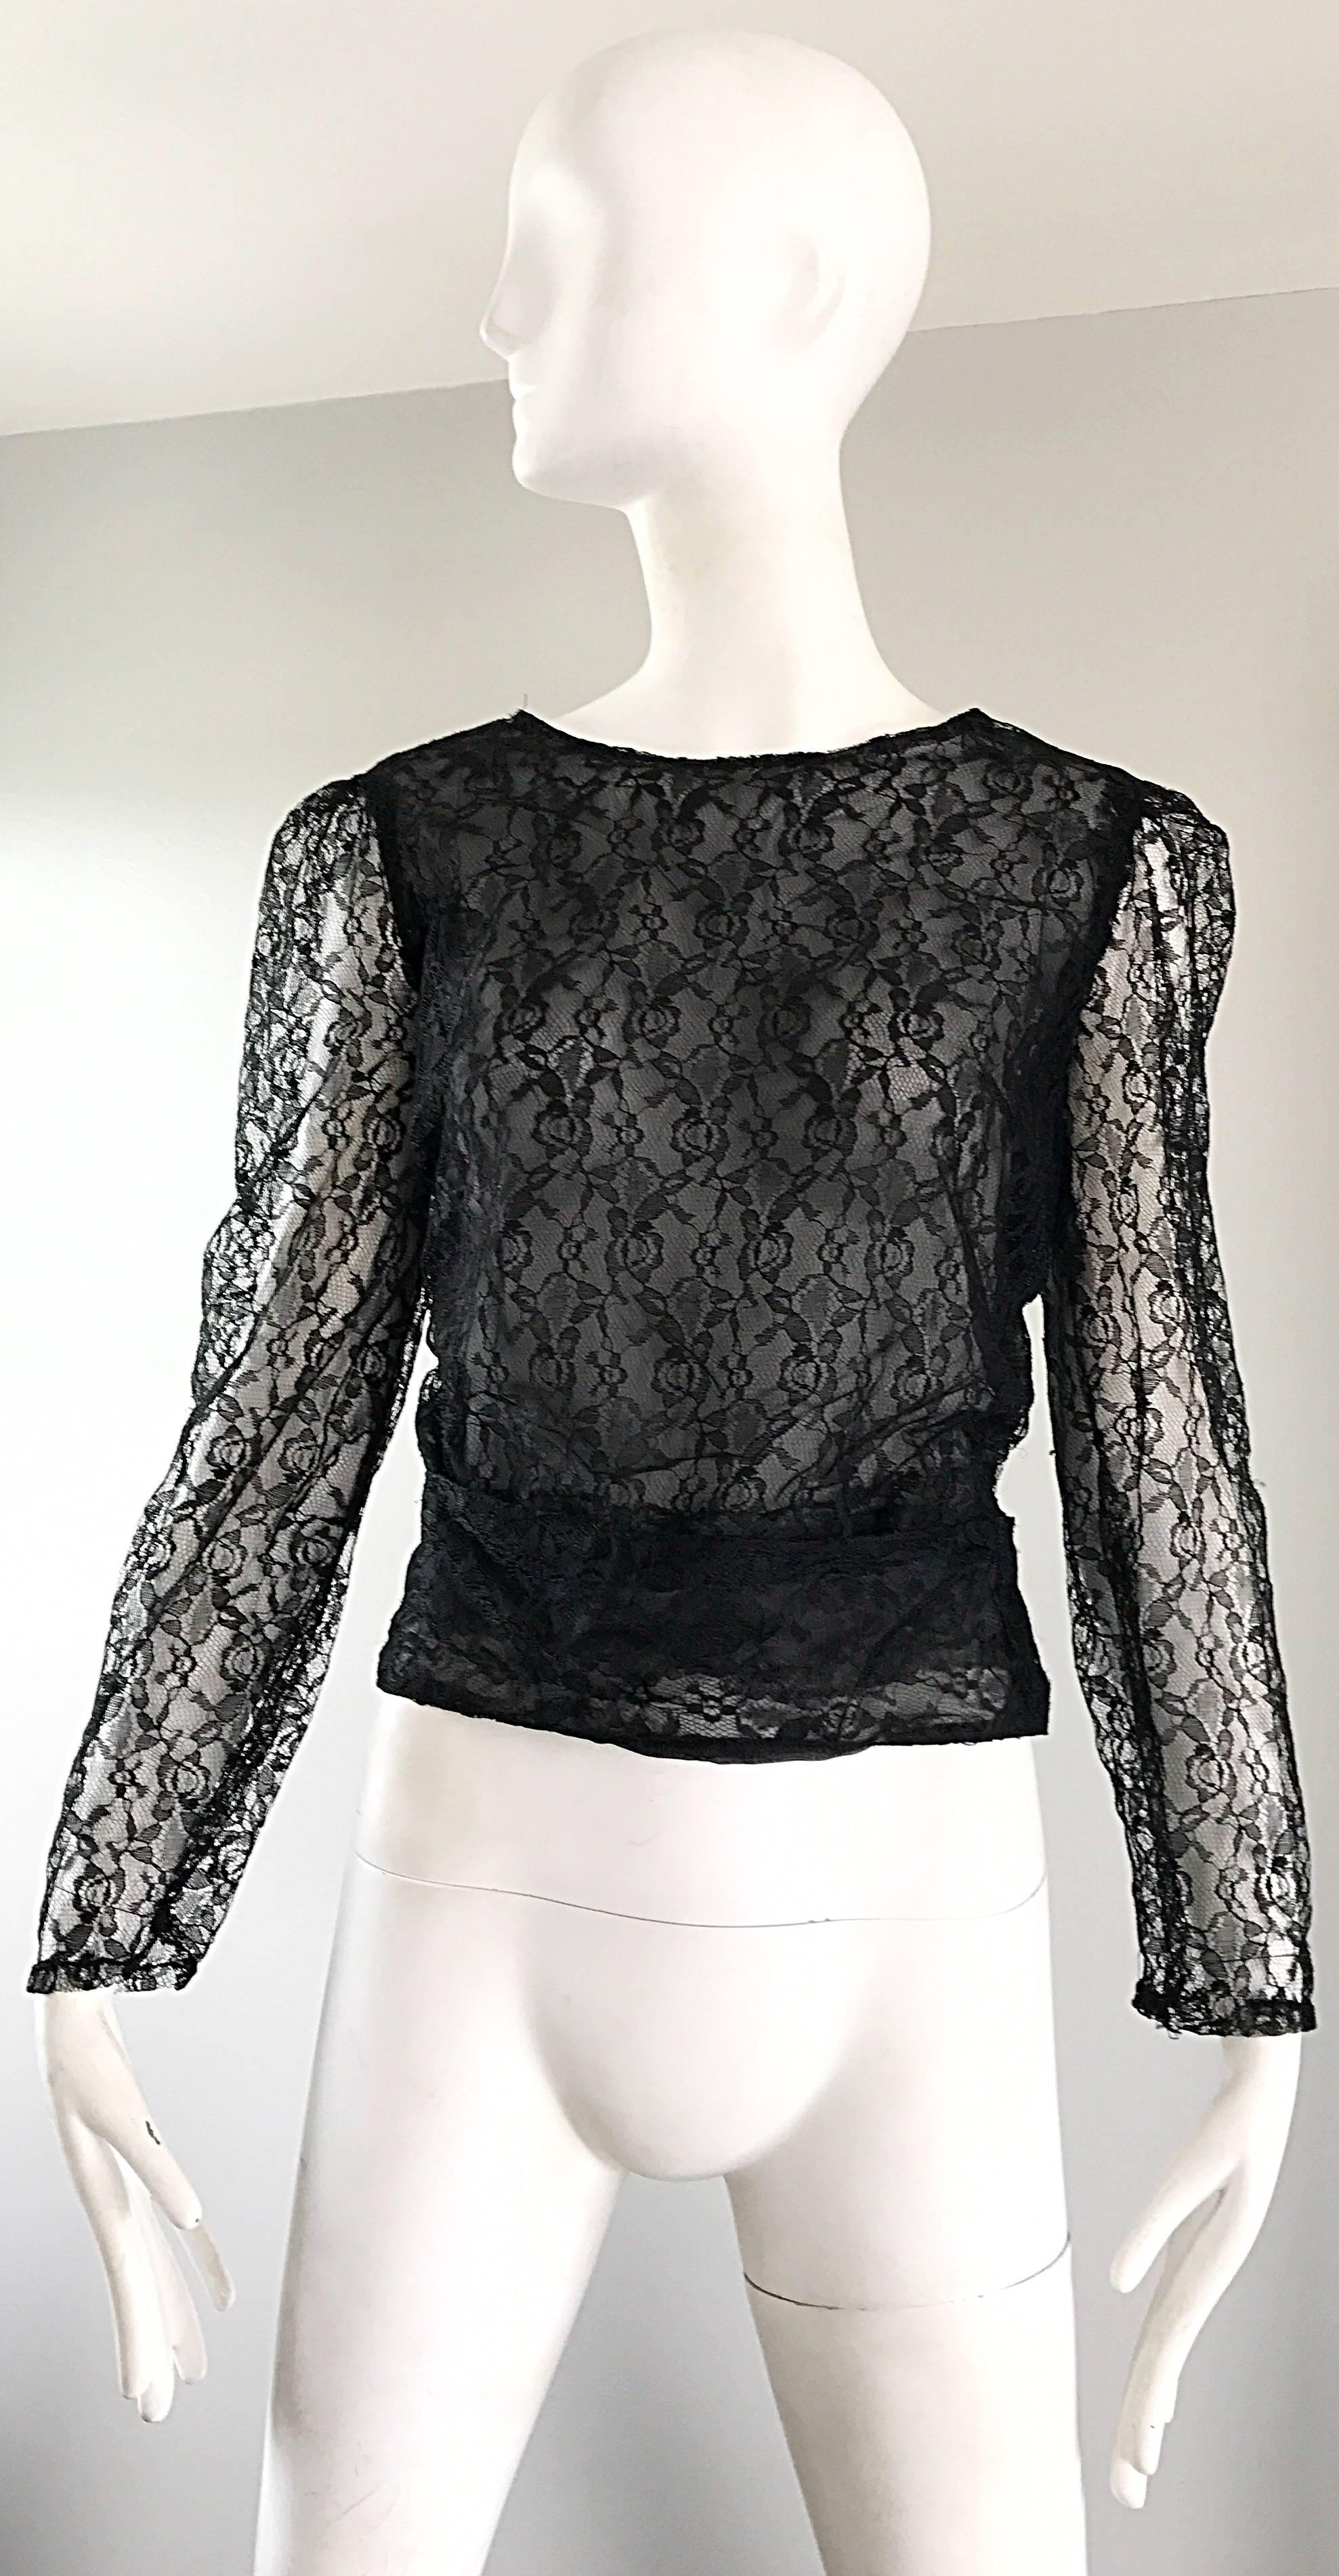 Gorgeous 1990s attributed to CHANEL by KARL LAGERFELD  couture grade black silk chiffon French chantilly lace sheer blouse! Though no designer label remains (priced accordingly), original owner swears up and down that this rare gem is Chanel...She